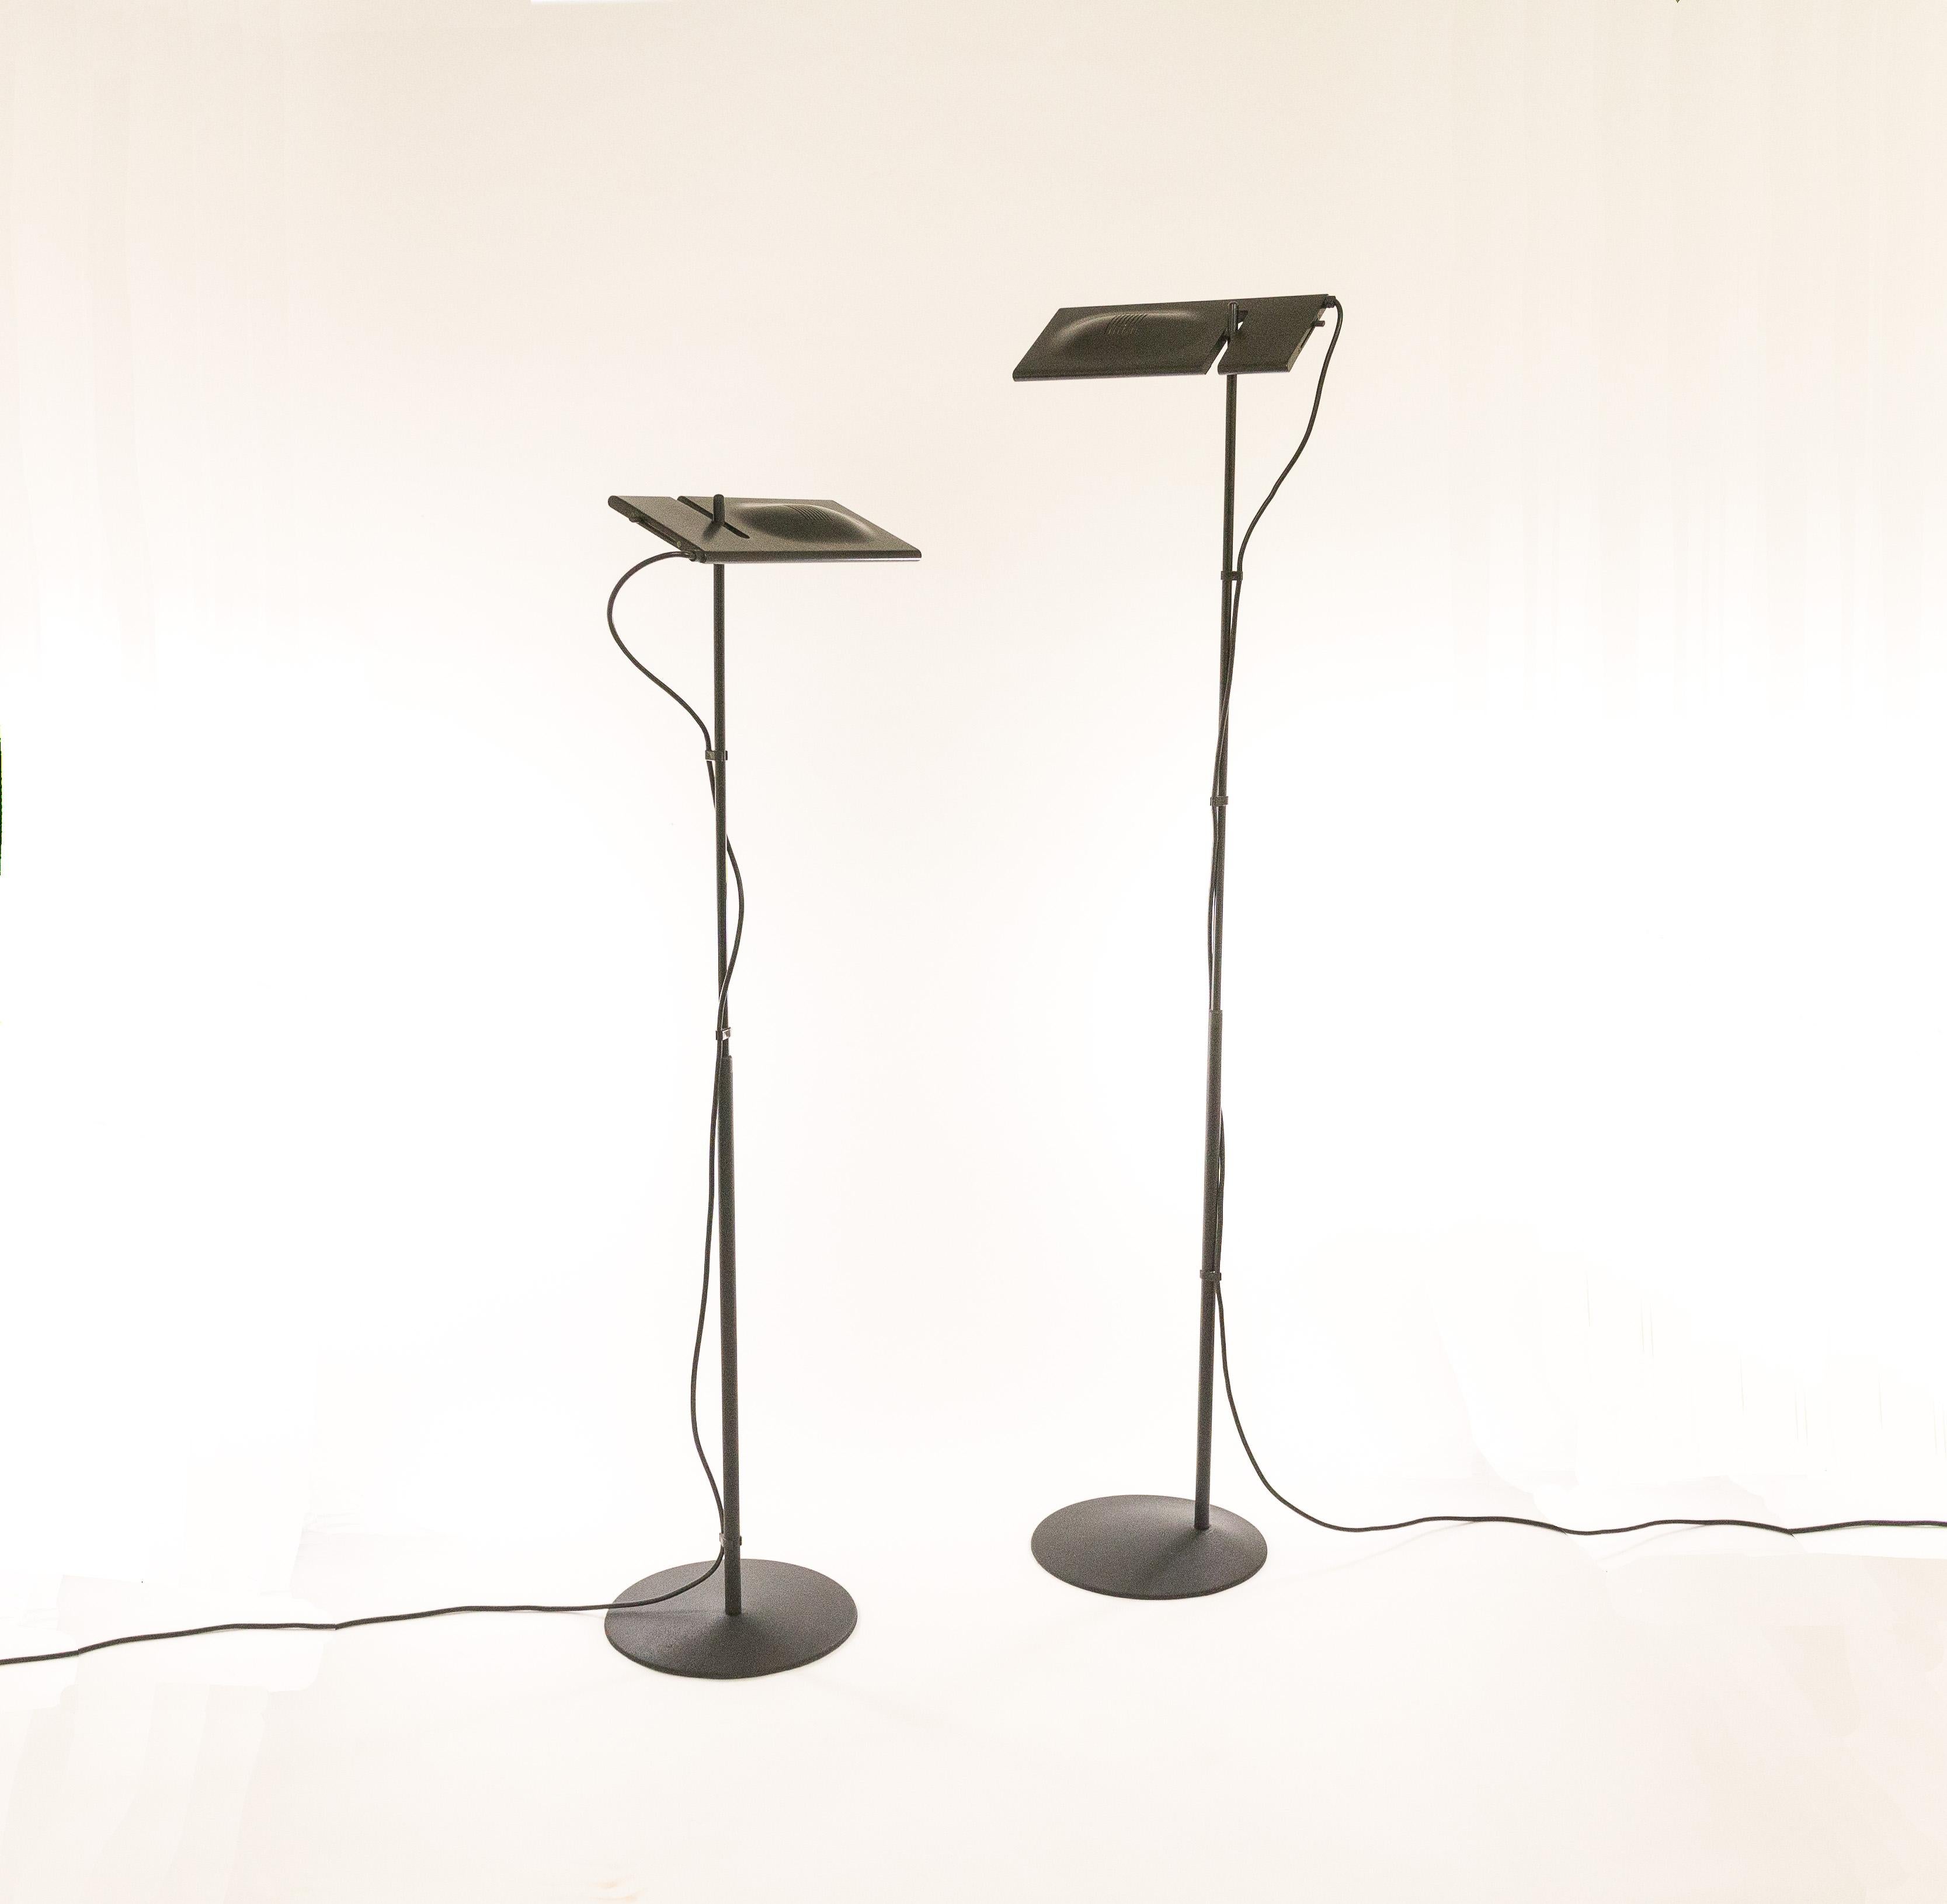 A pair of halogen floor lamps Duna designed by Mario Barbaglia and Marco Colombo for PAF Studio.

Noticeable details of this early edition: The height of both lamps can vary between 137 cm / 54 inch and 196 cm / 78 inch (!) and the rectangular